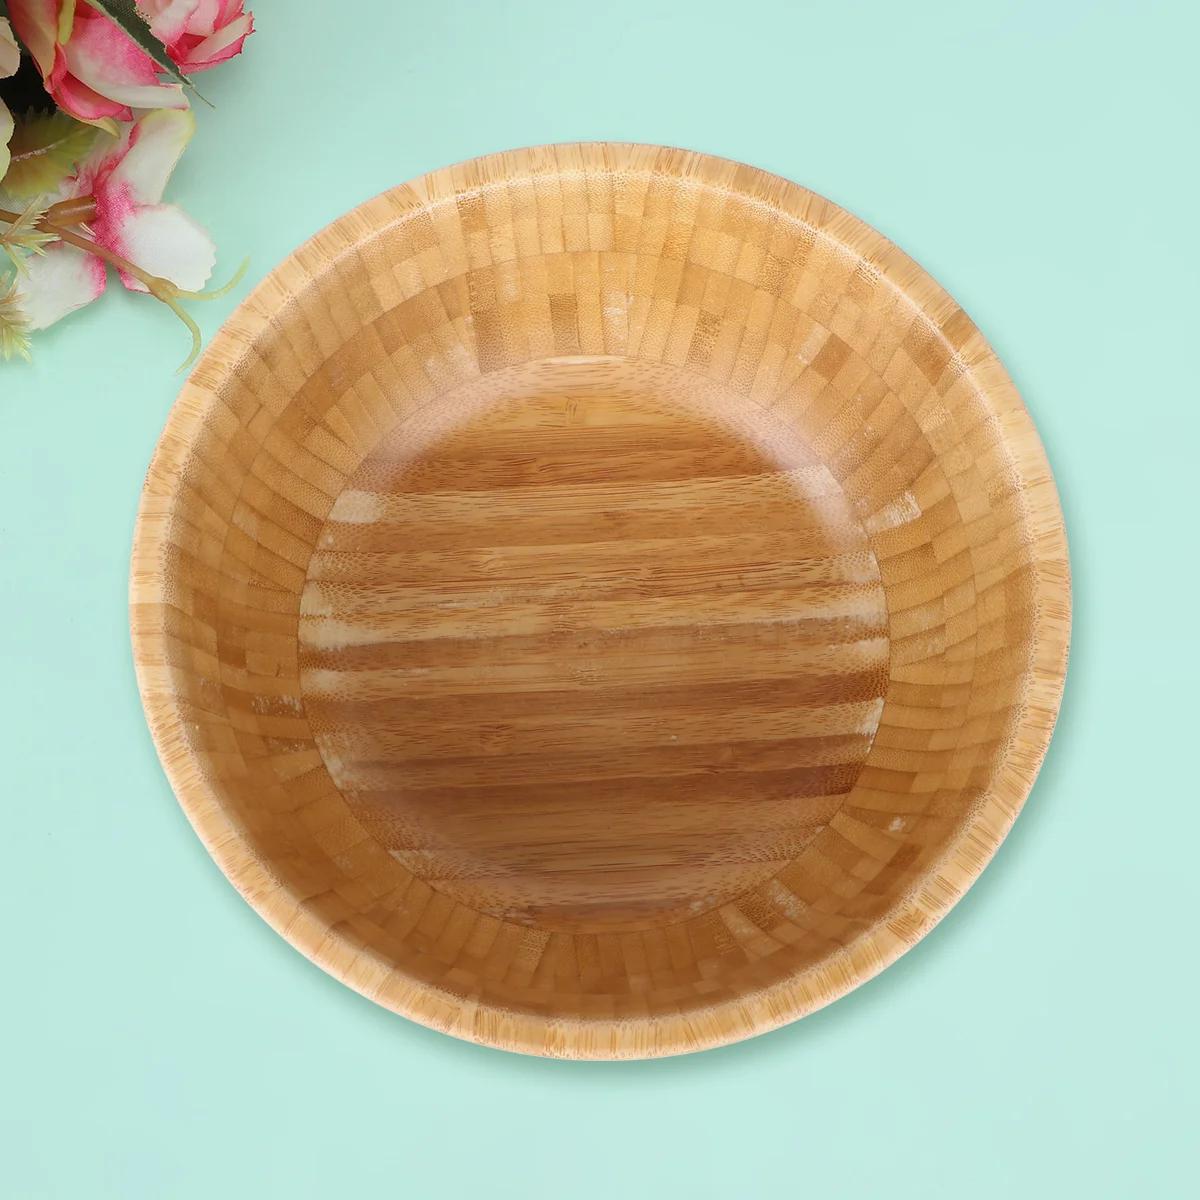 

Japanese Bowls Dessert Candy Decorative Wooden Serving Italian Pasta Nut Mixing Cereal Bamboo Food Fruit